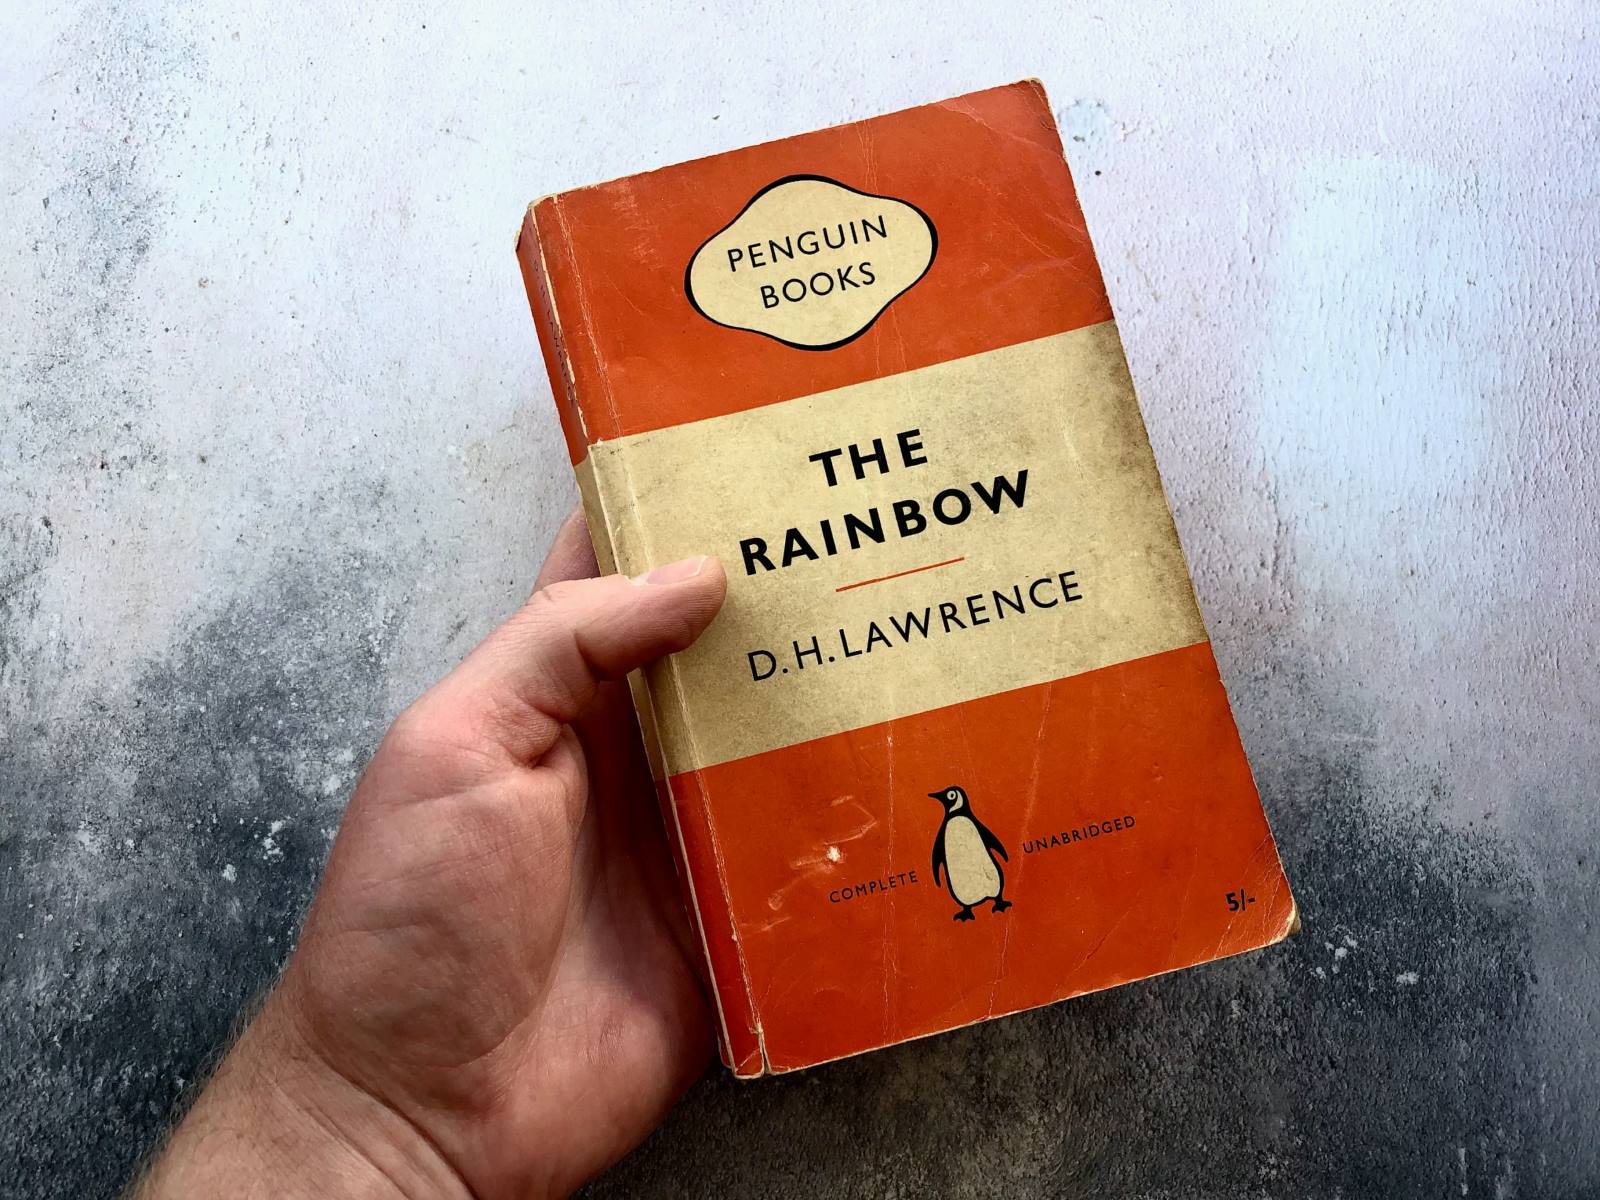 11-astonishing-facts-about-the-rainbow-d-h-lawrence